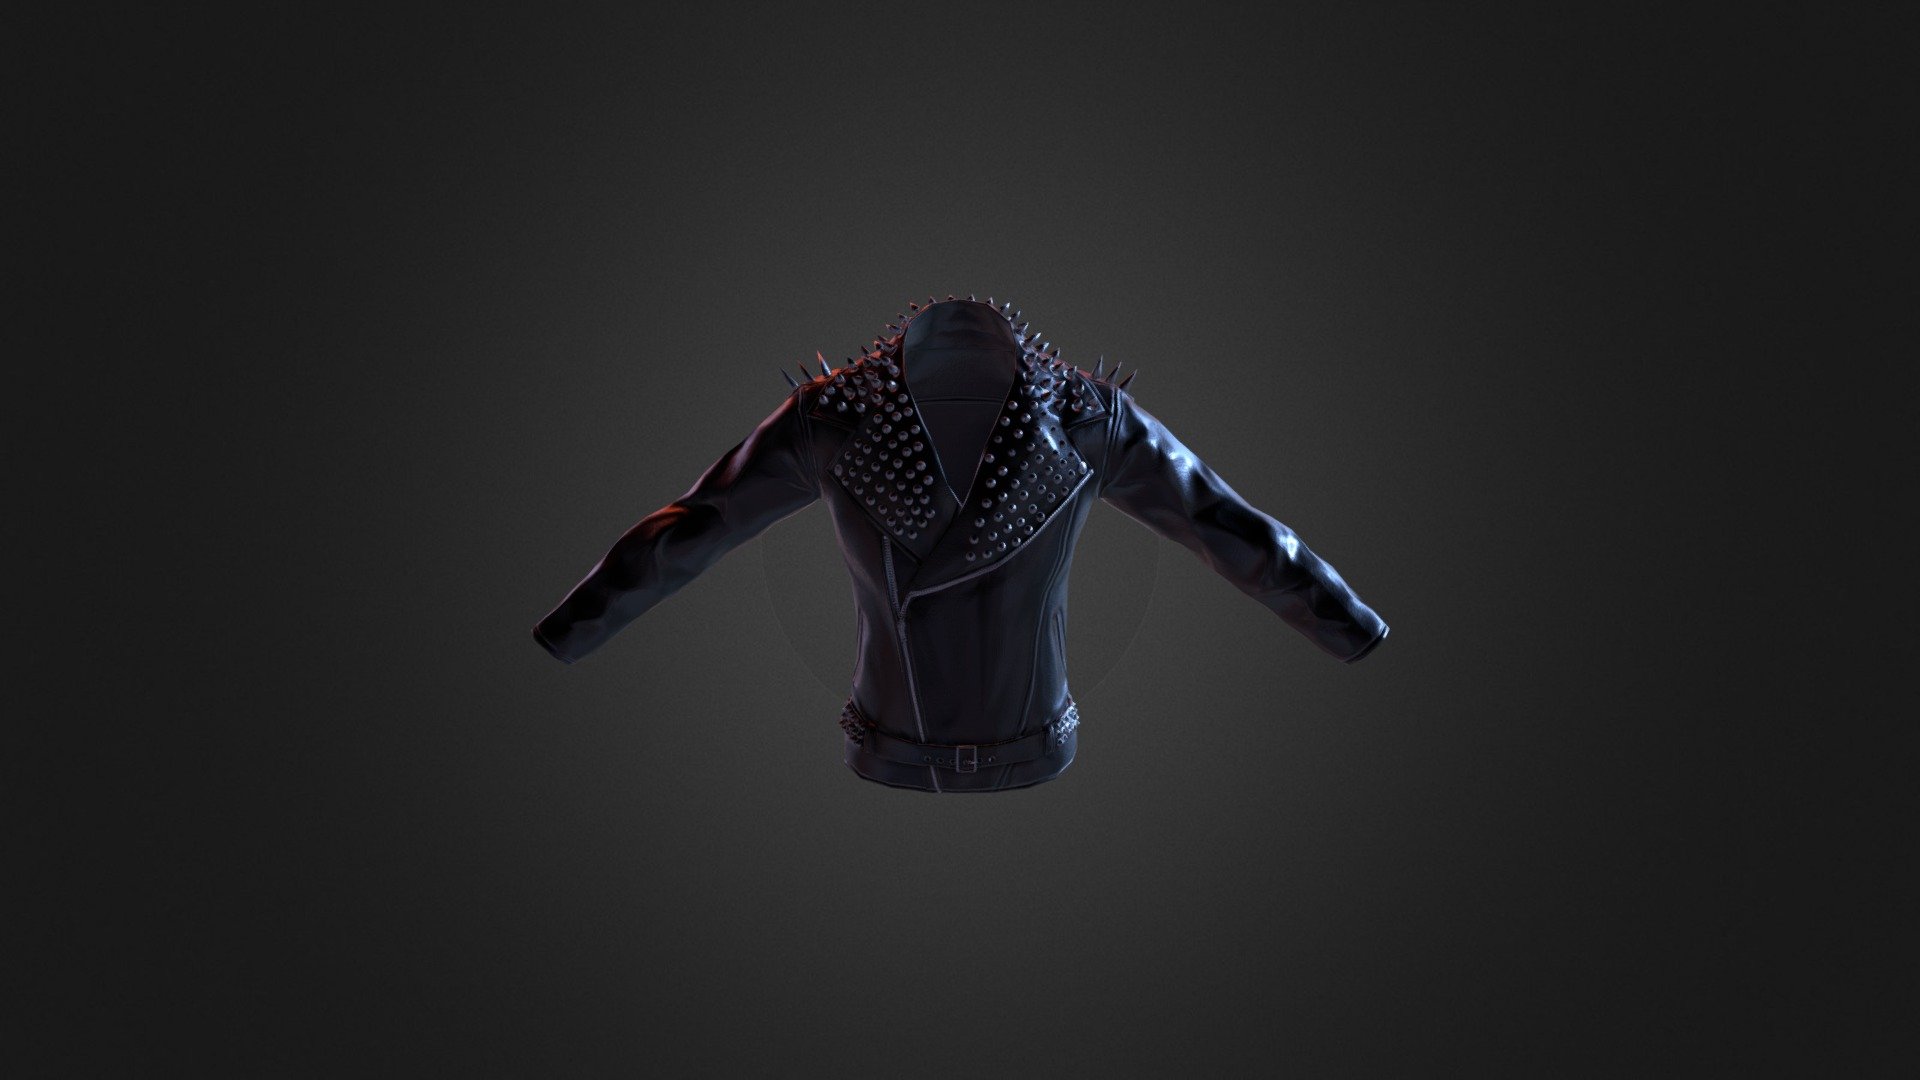 This is the result of two weeks work - starting with a base creation in modeled in Maya, sculpted in ZBrush,  retopotolgized and then baked in Substance Painter.  This is based of a spiked biker jacket sold by Killstar clothing.  This was my first time creating clothing 3d model